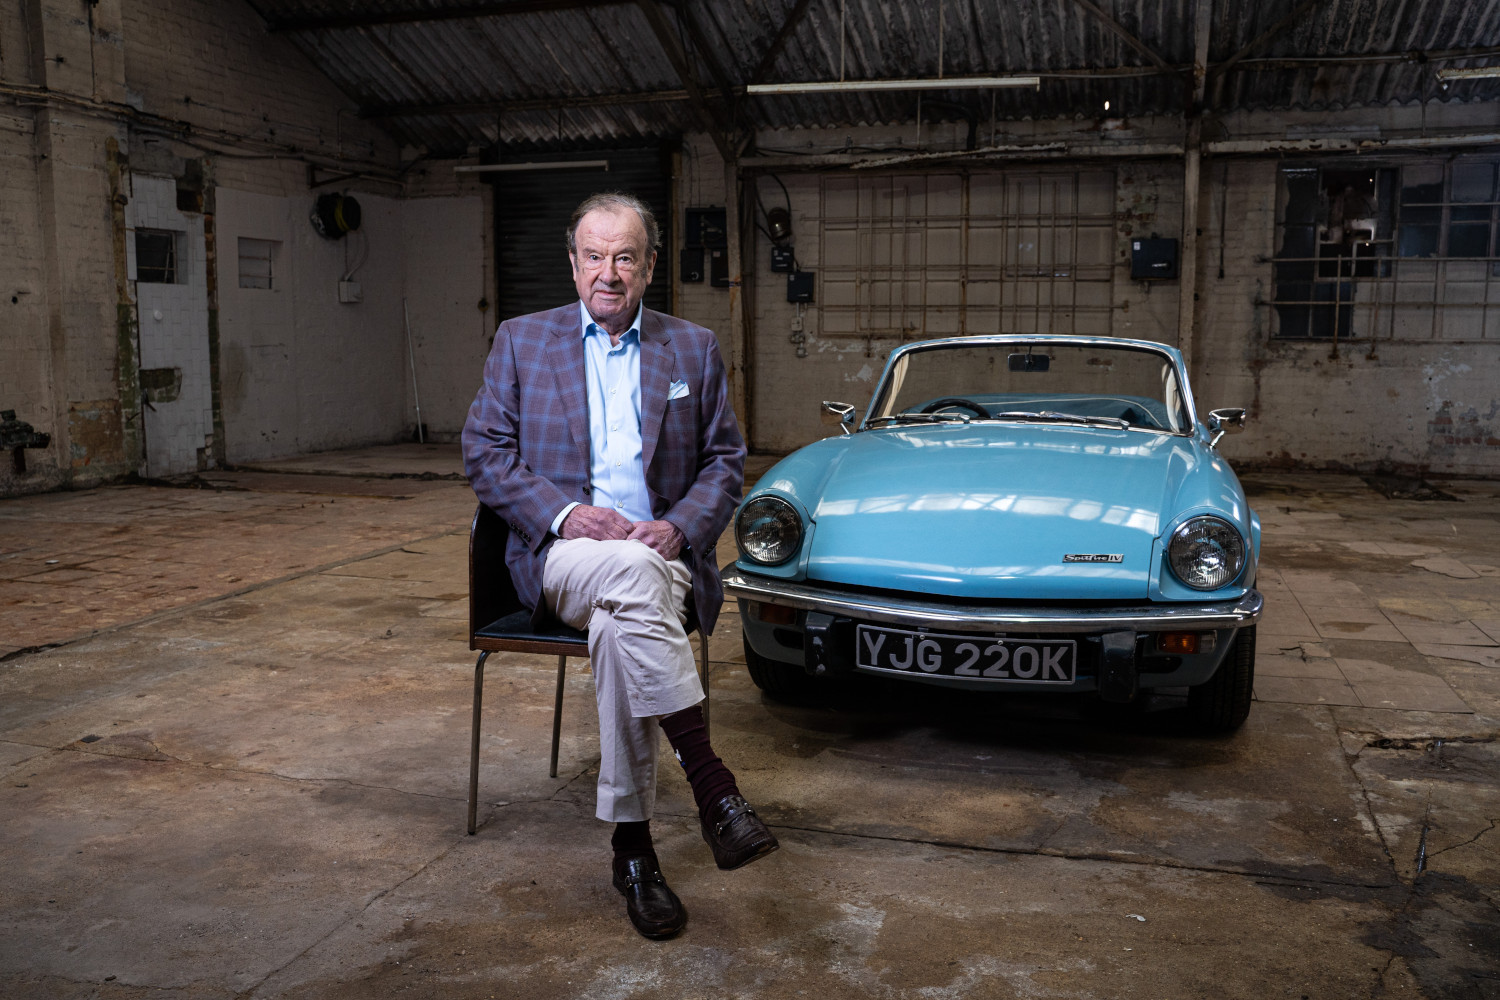 John Mills in front of a classic car